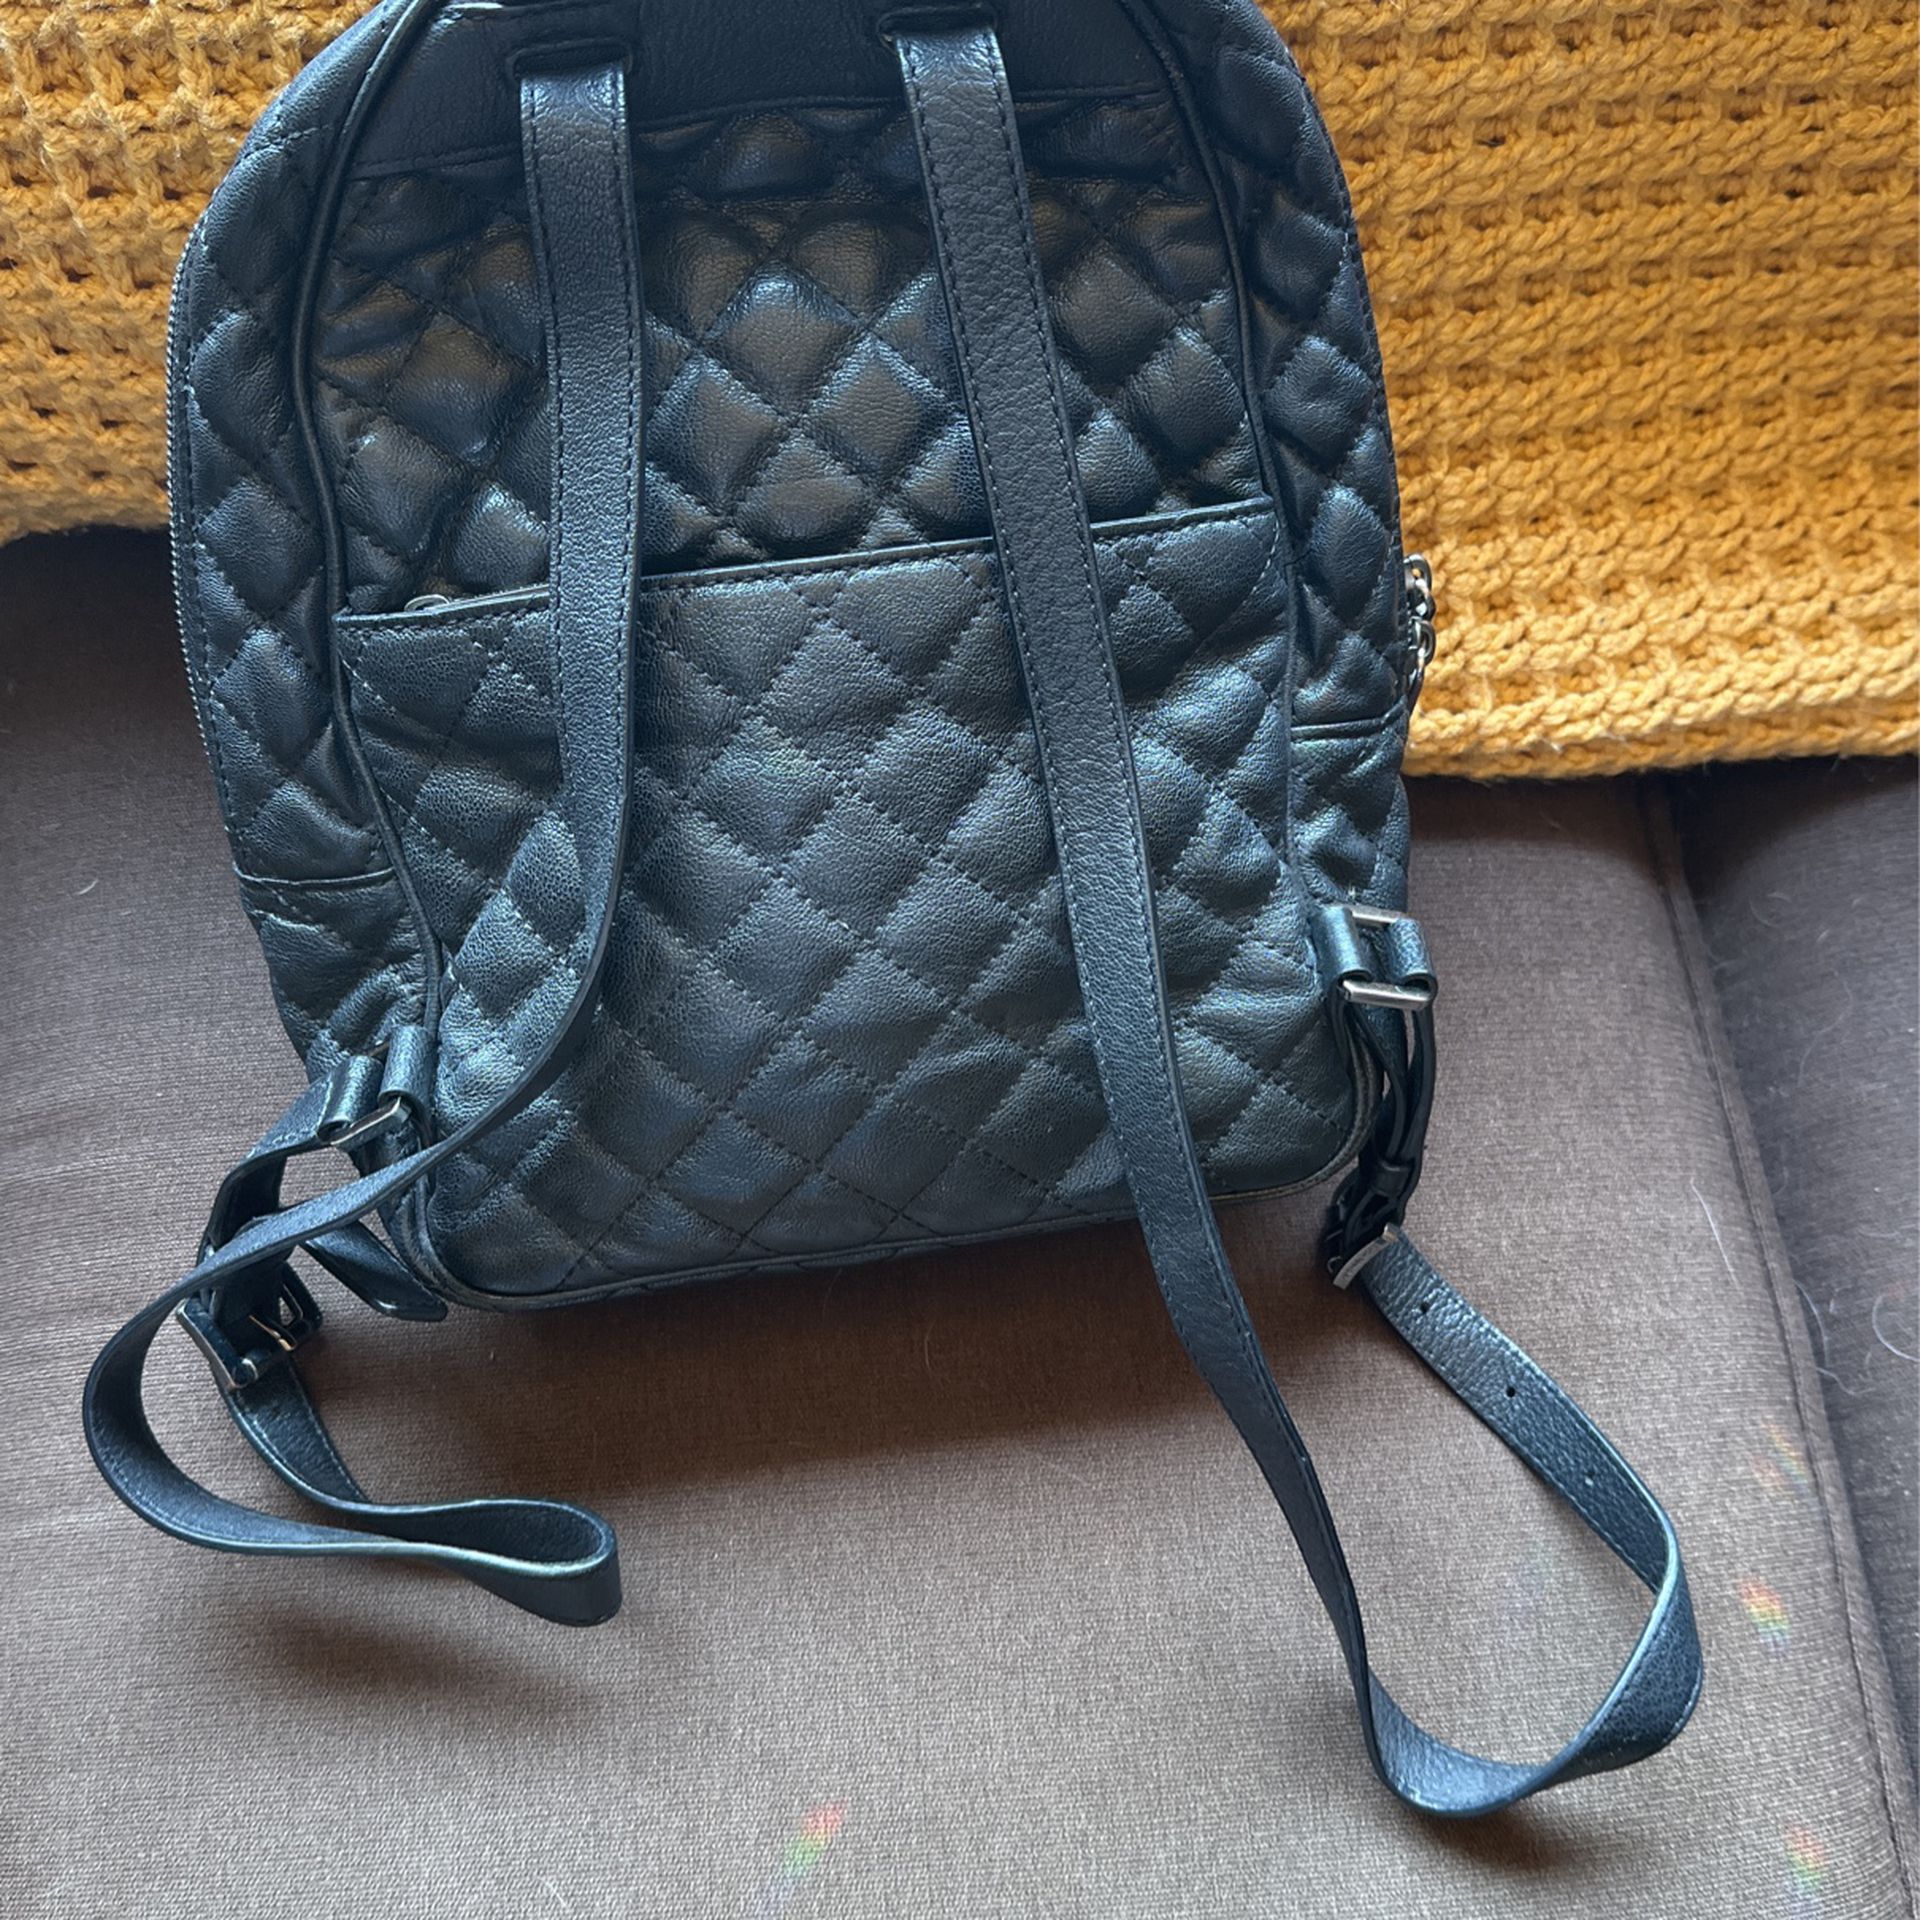 Michael Kors Rhea Black Backpack. for Sale in Pearland, TX - OfferUp